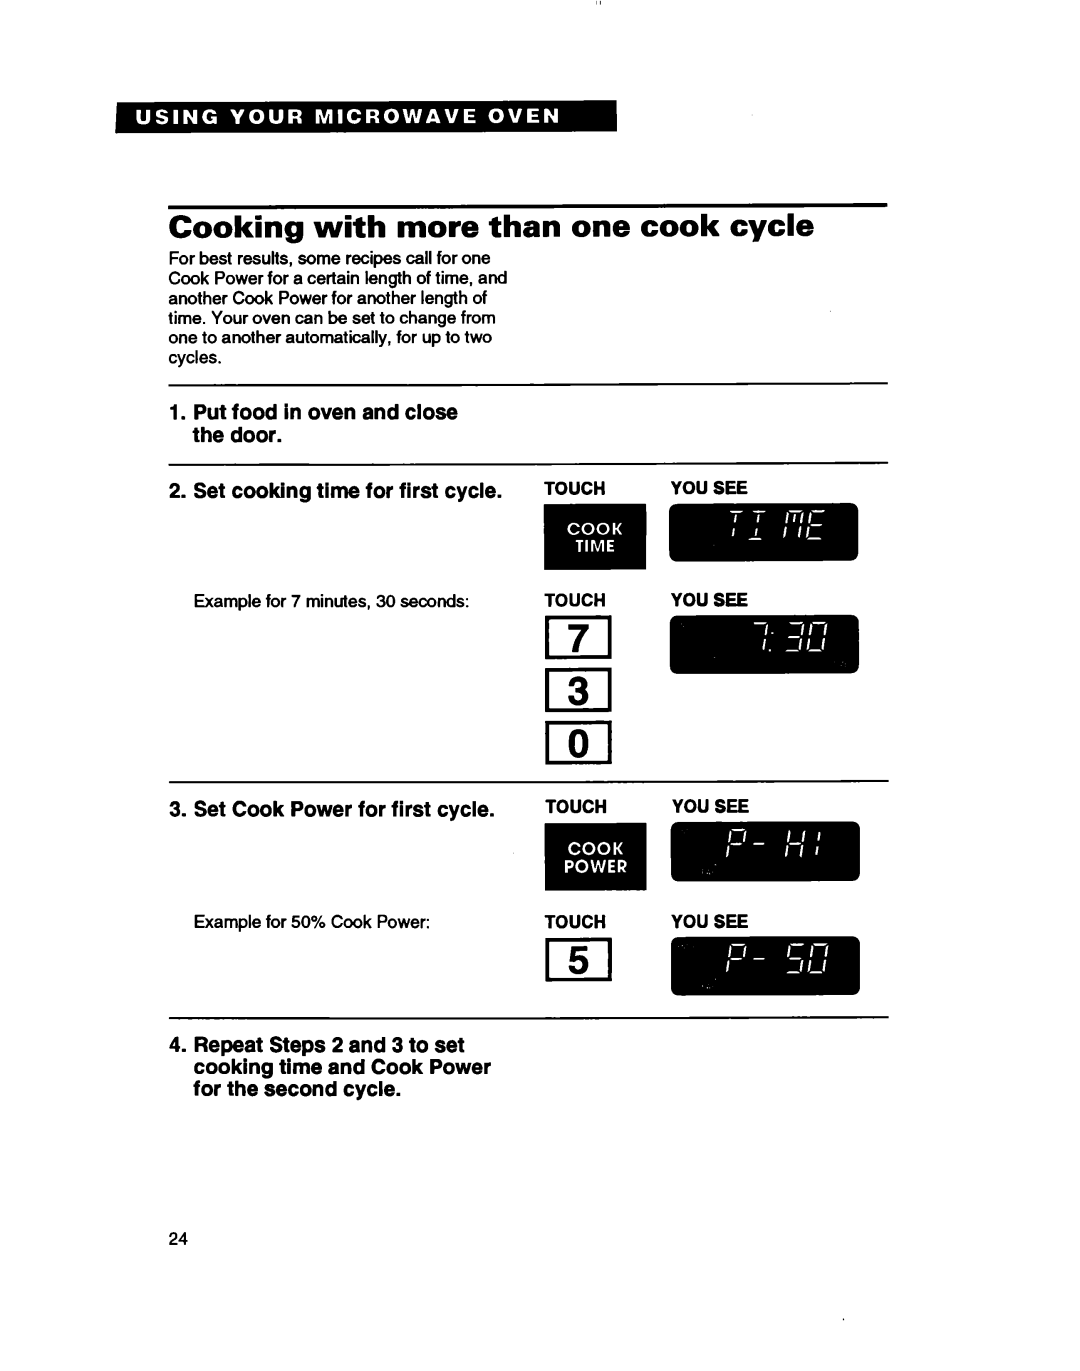 Whirlpool MH7110XB Cooking with more than one cook cycle, Set cooking tlme for first cycle, Set Cook Power for first cycle 